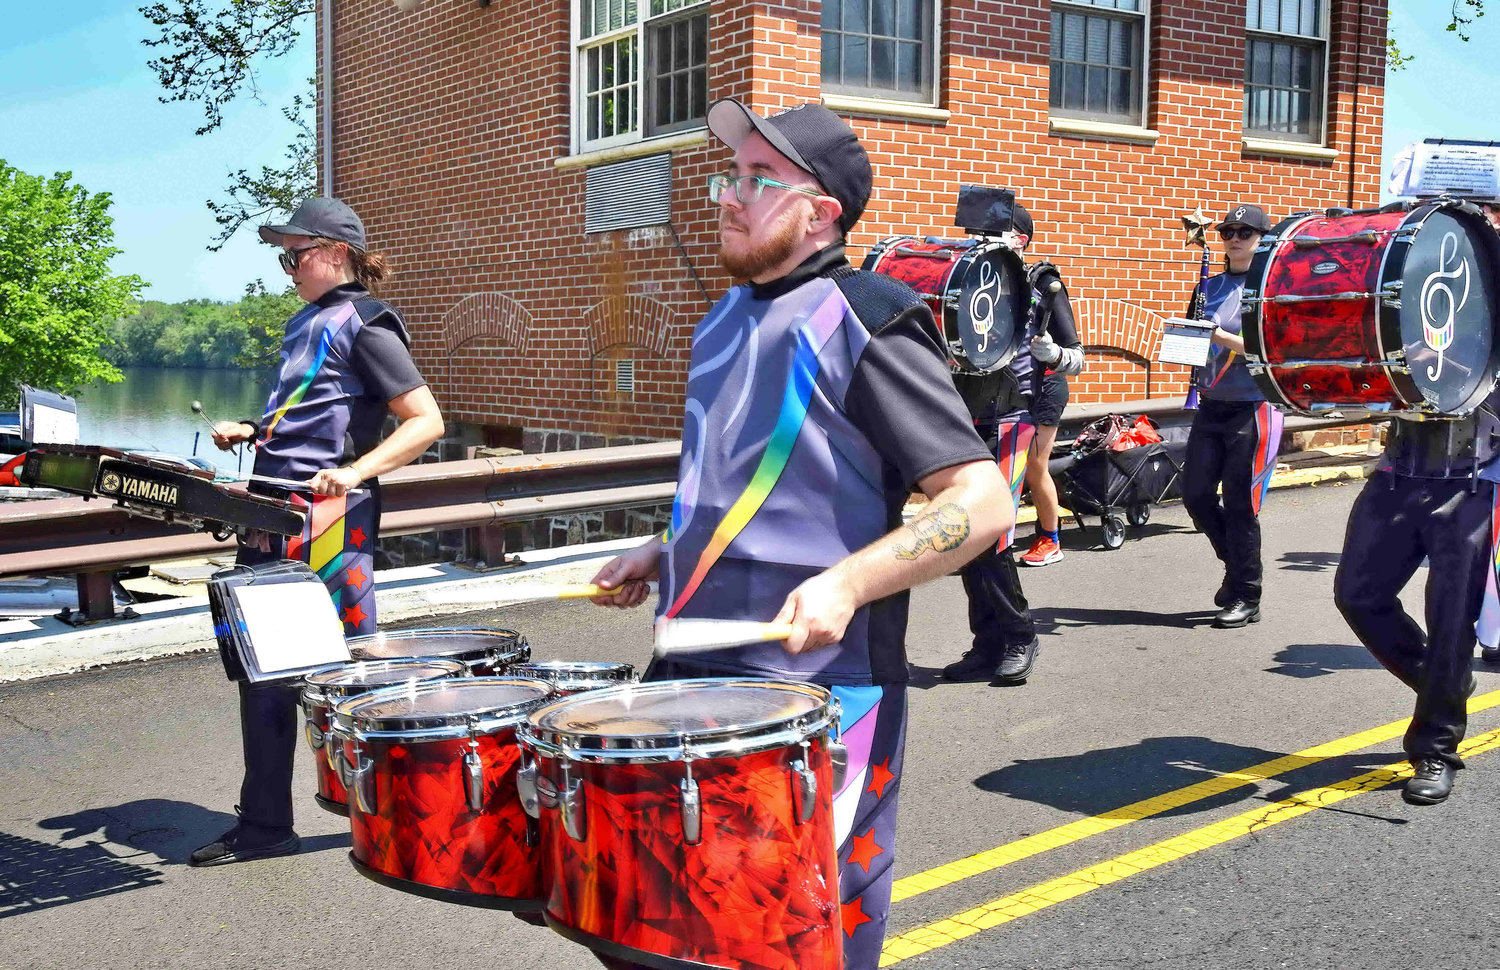 Members of DC’s Different Drummers from Washington, D.C., play as they march.